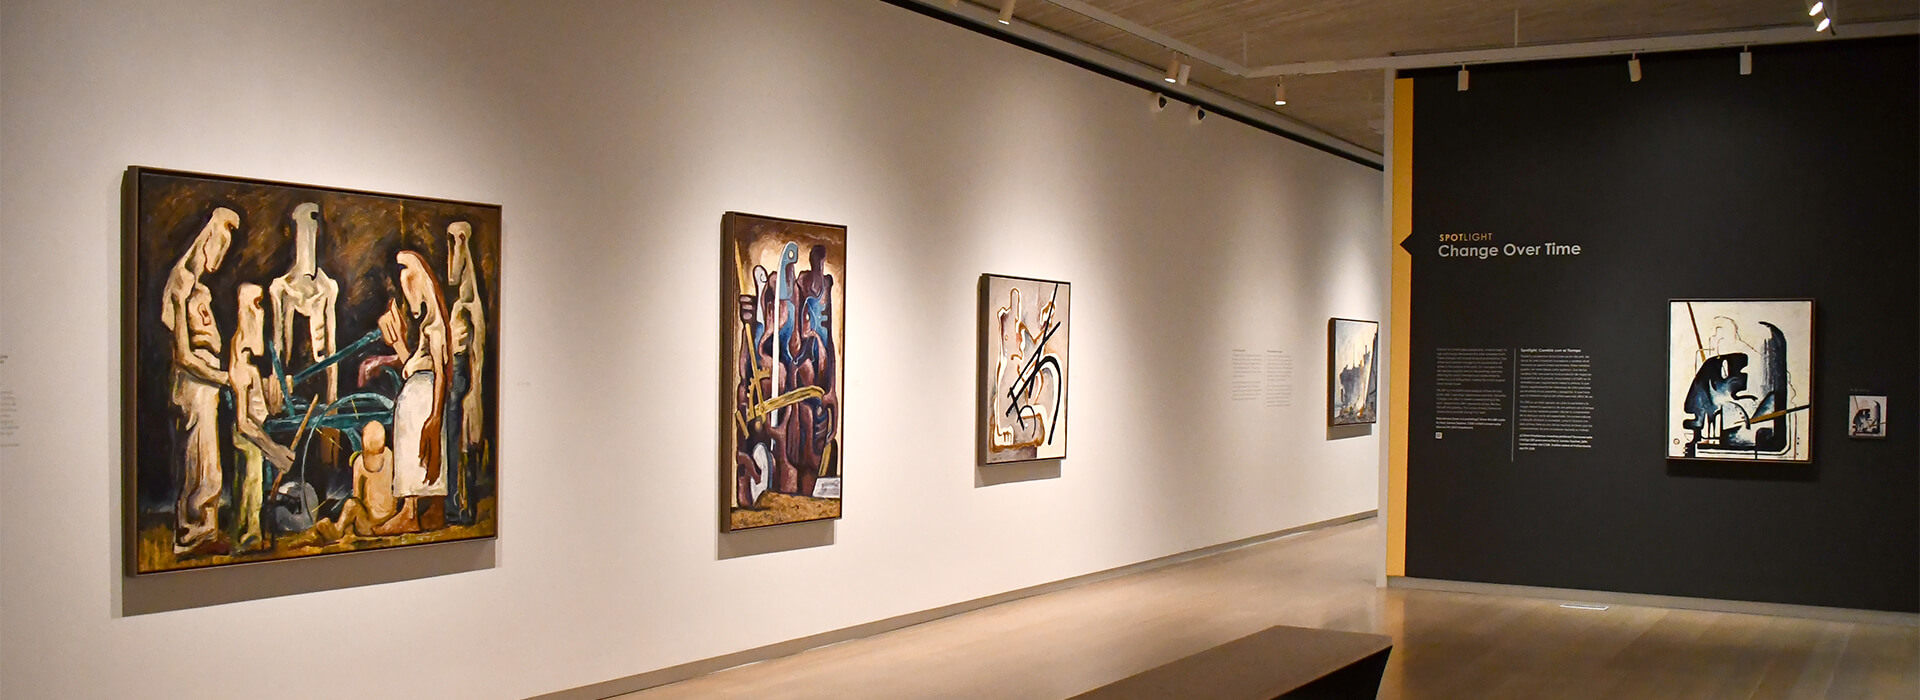 Horizontal image of a dark gallery with paintings on the walls